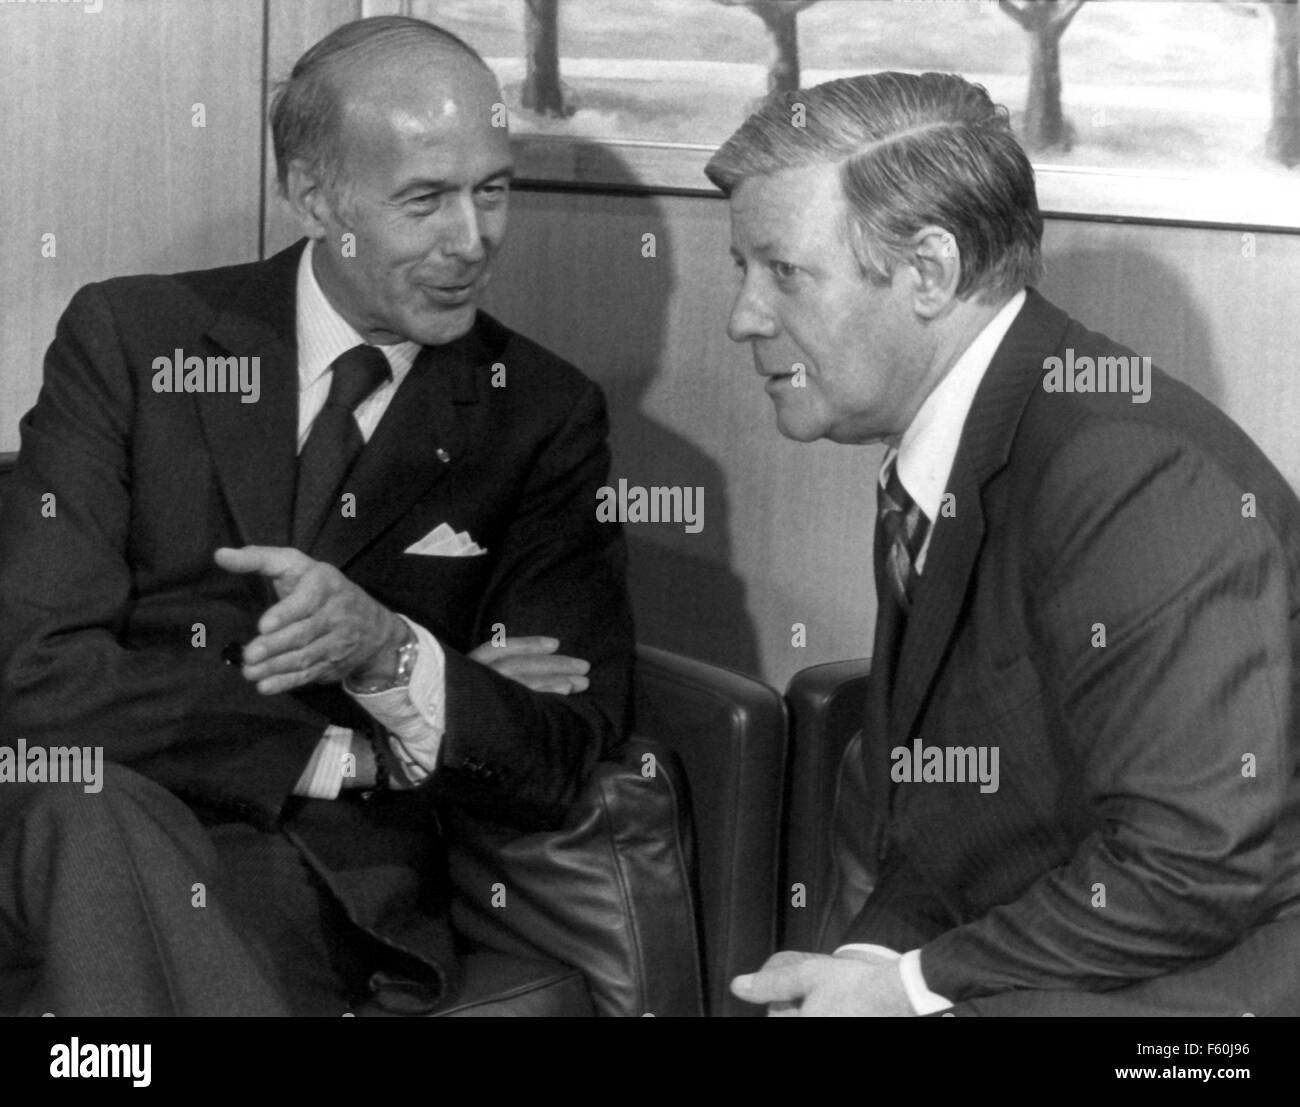 FILE - A file picture dated 16 June 1977 shows French President Valery Giscard d'Estaing (l) and German Chancellor Helmut Schmidt at the beginnign of their meetings at the German chancellery in Bonn, Germany. PHOTO: HEINRICH SANDEN/DPA Stock Photo